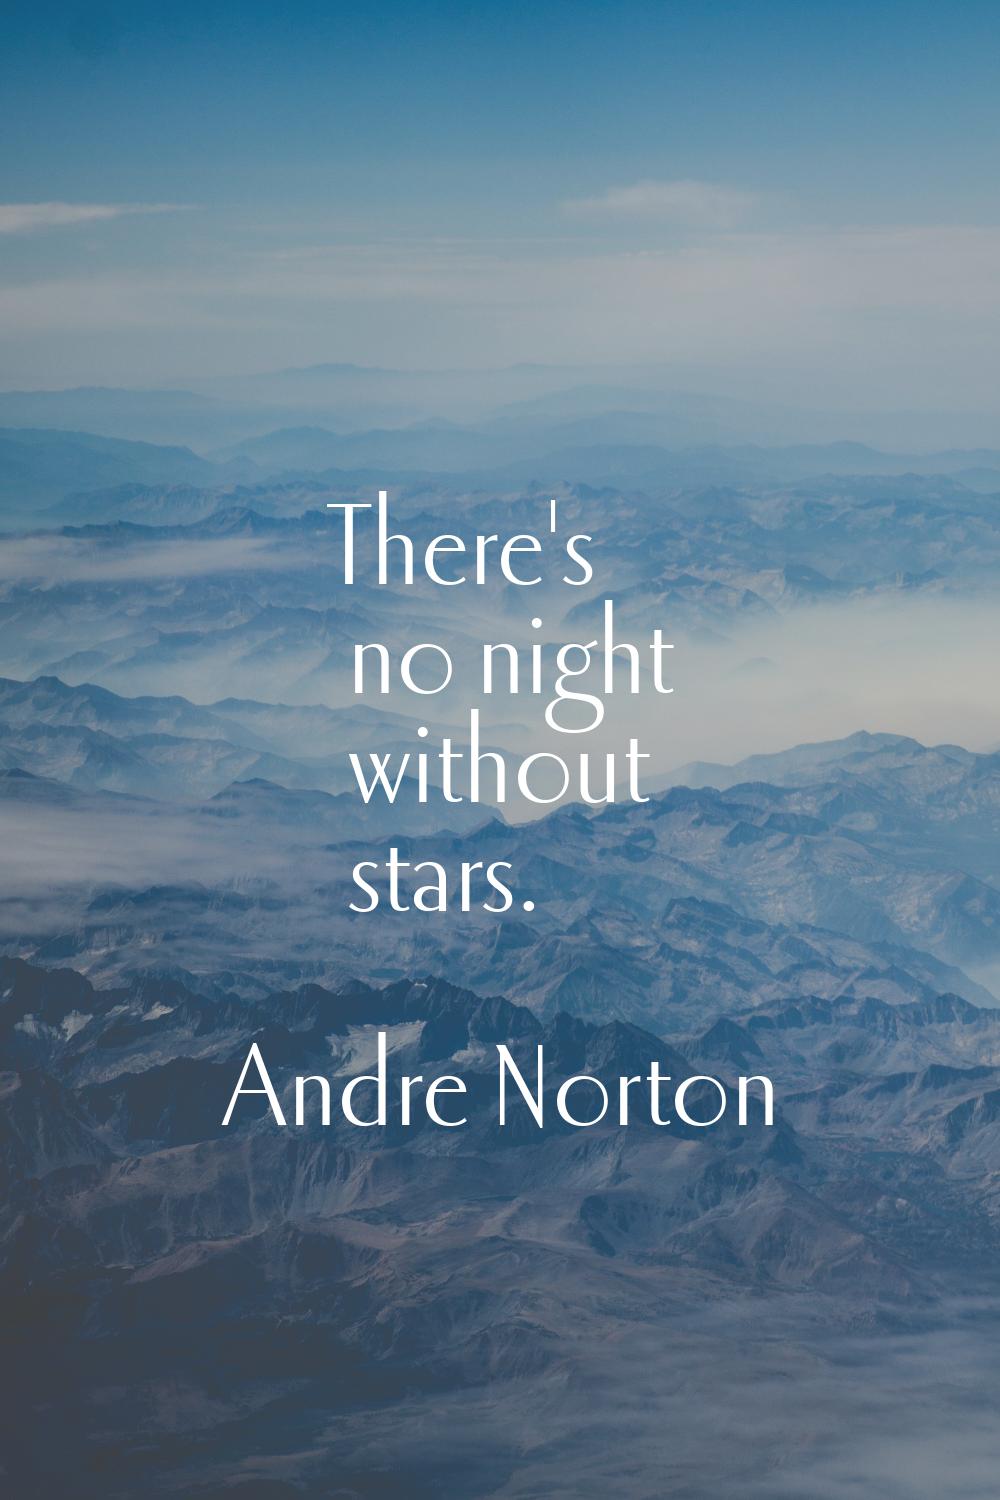 There's no night without stars.